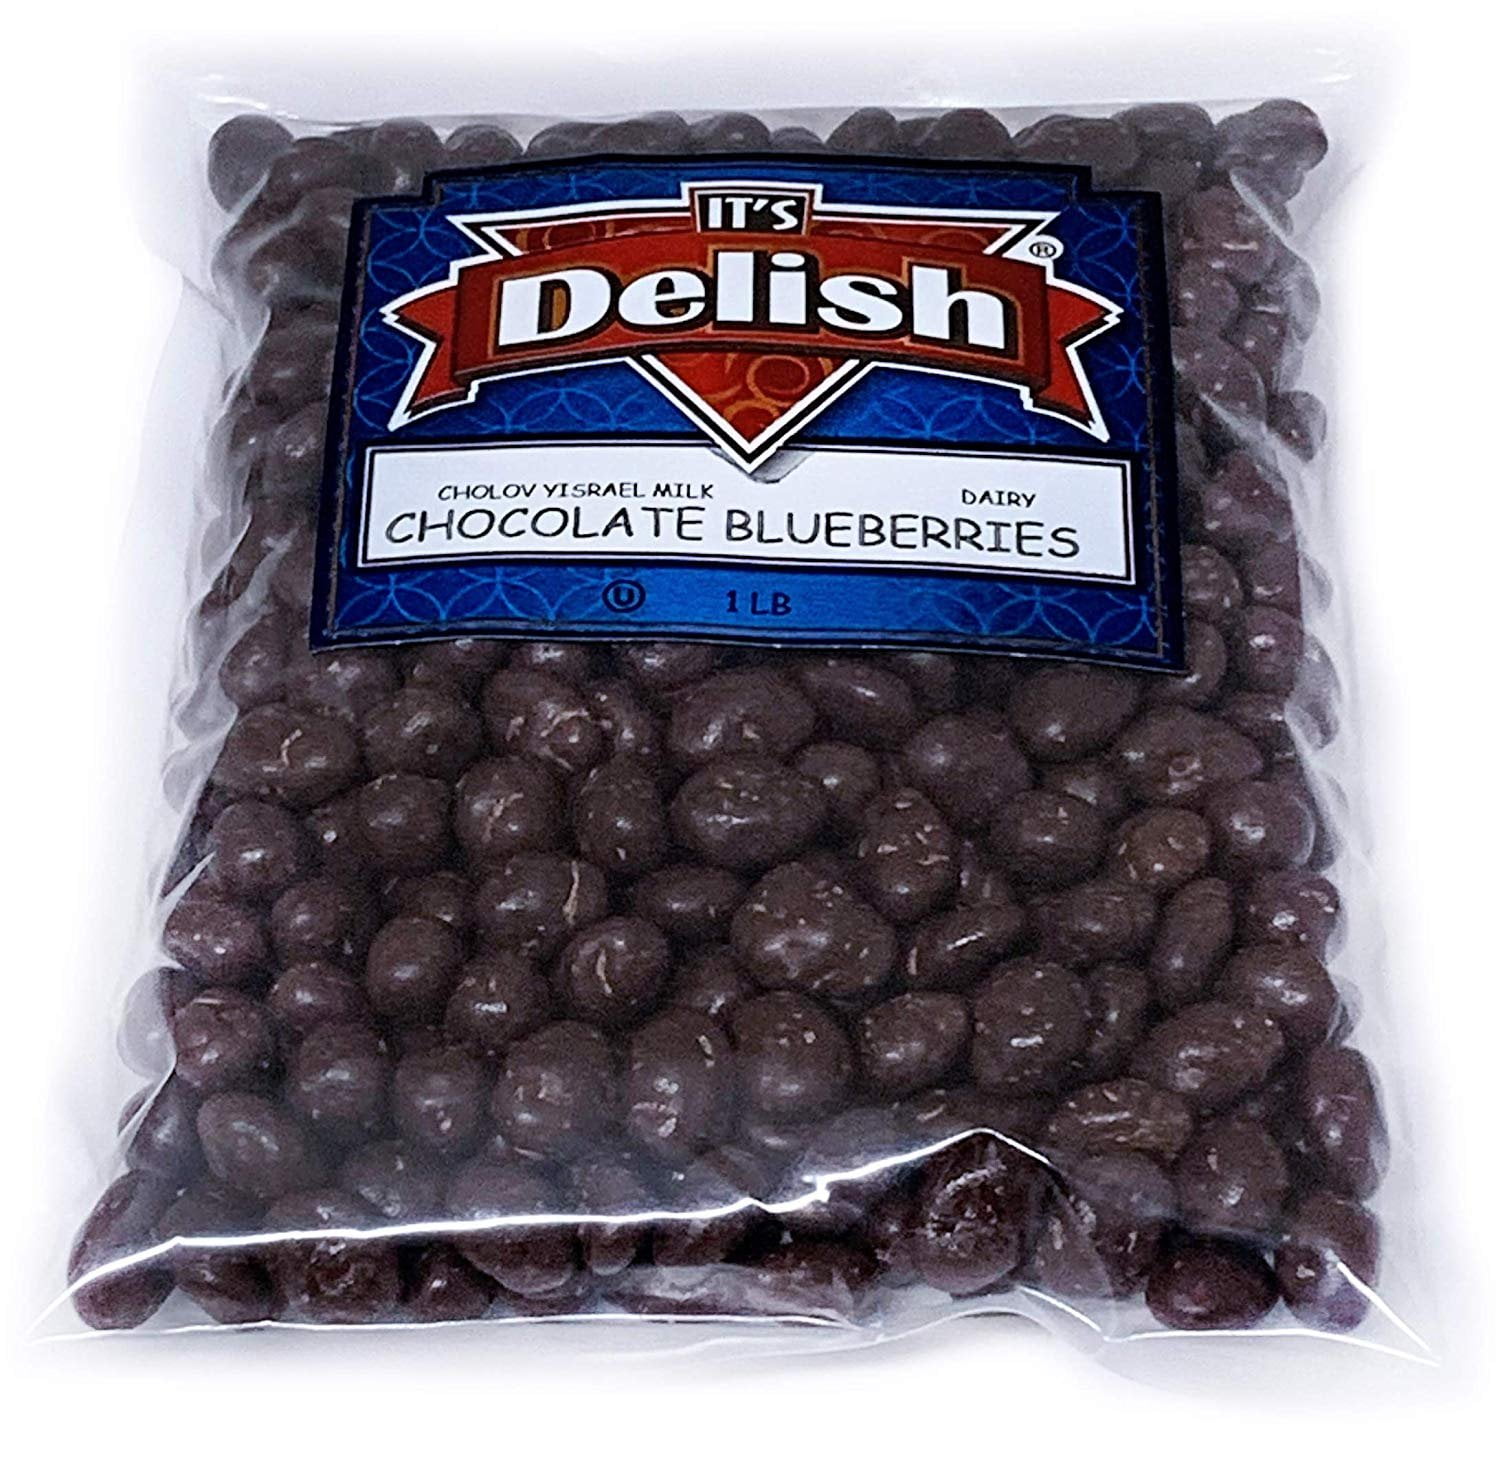 Gourmet Milk Chocolate Covered Blueberries by It's Delish, 10 lbs Bulk ...